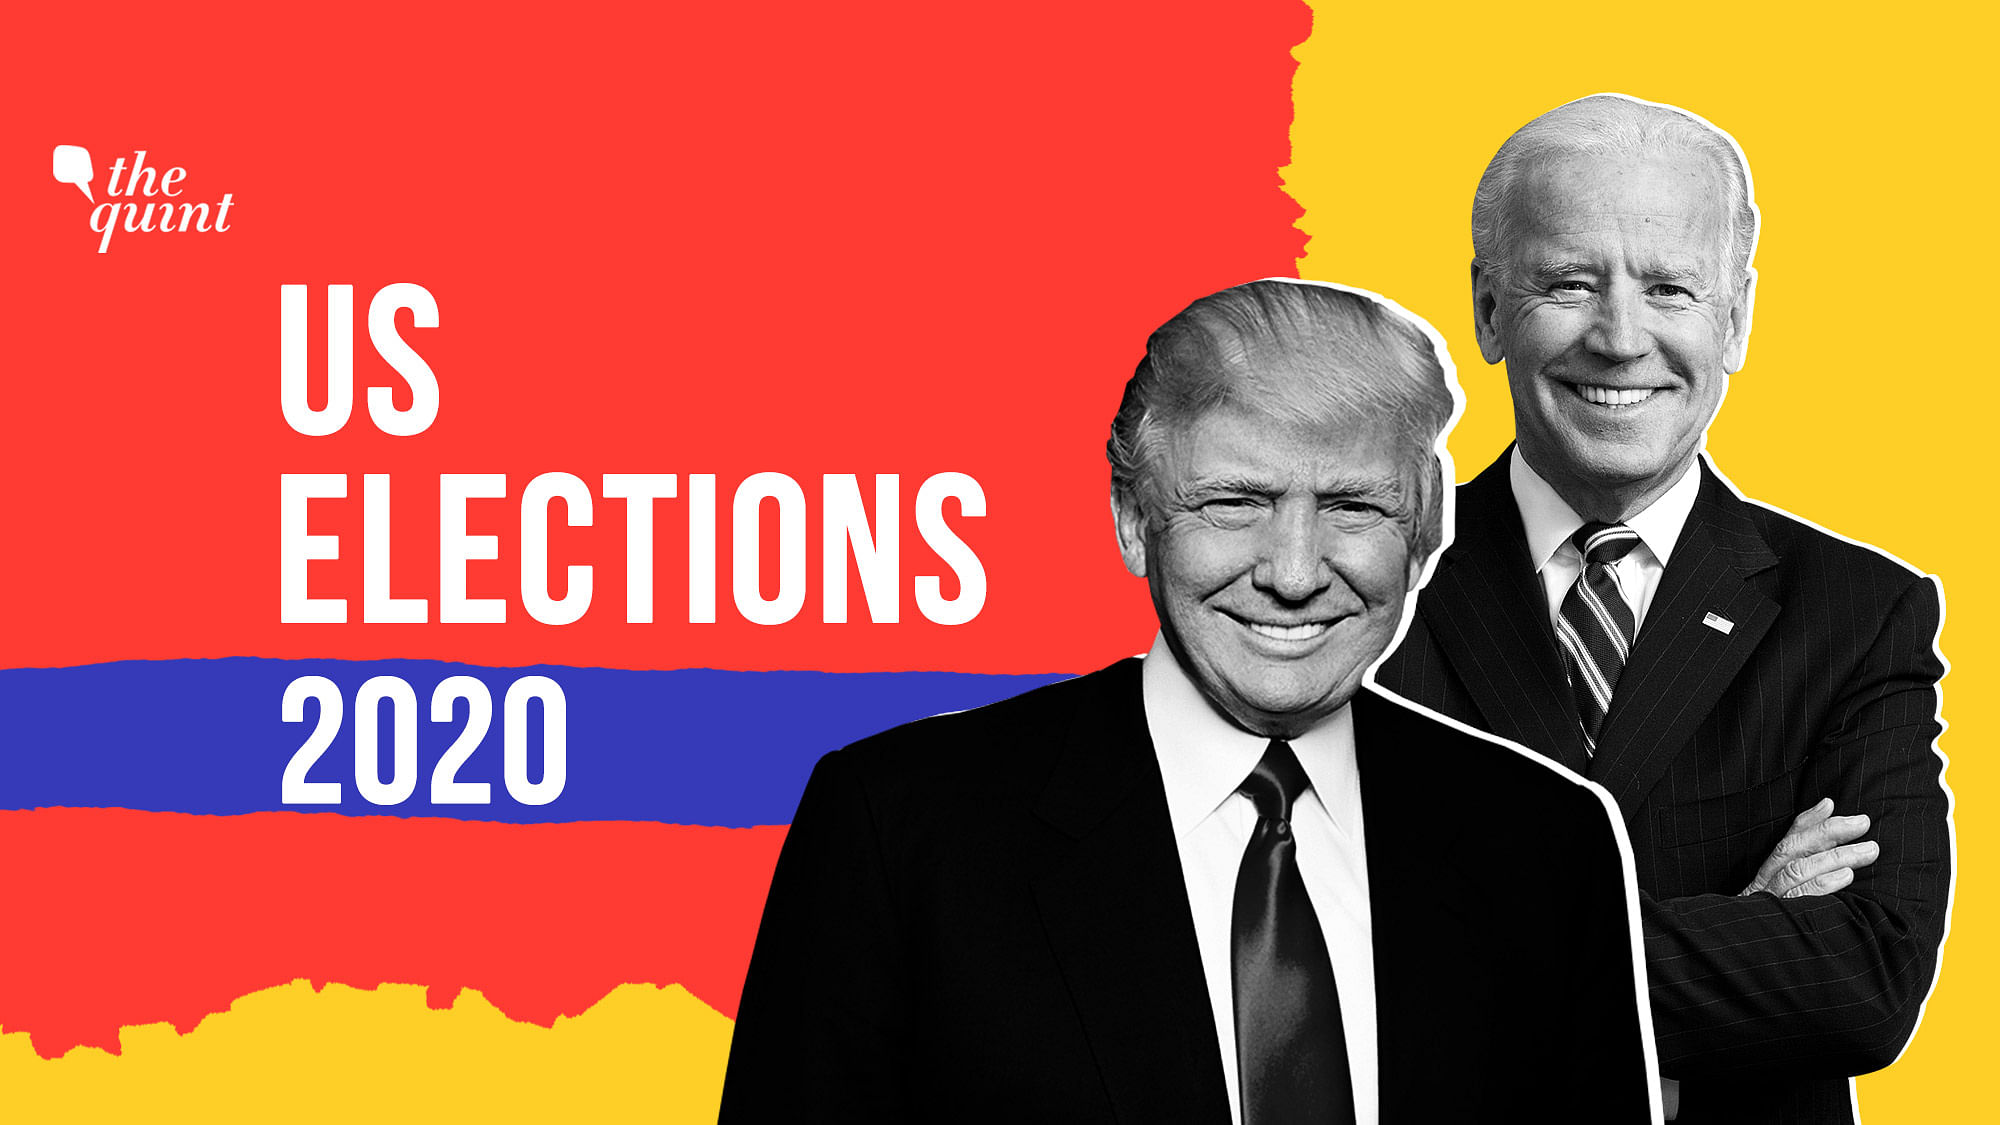 US Elections 2020: The US election is yet to see a decisive winner, but exit polls provide insights into demographics of the vote.